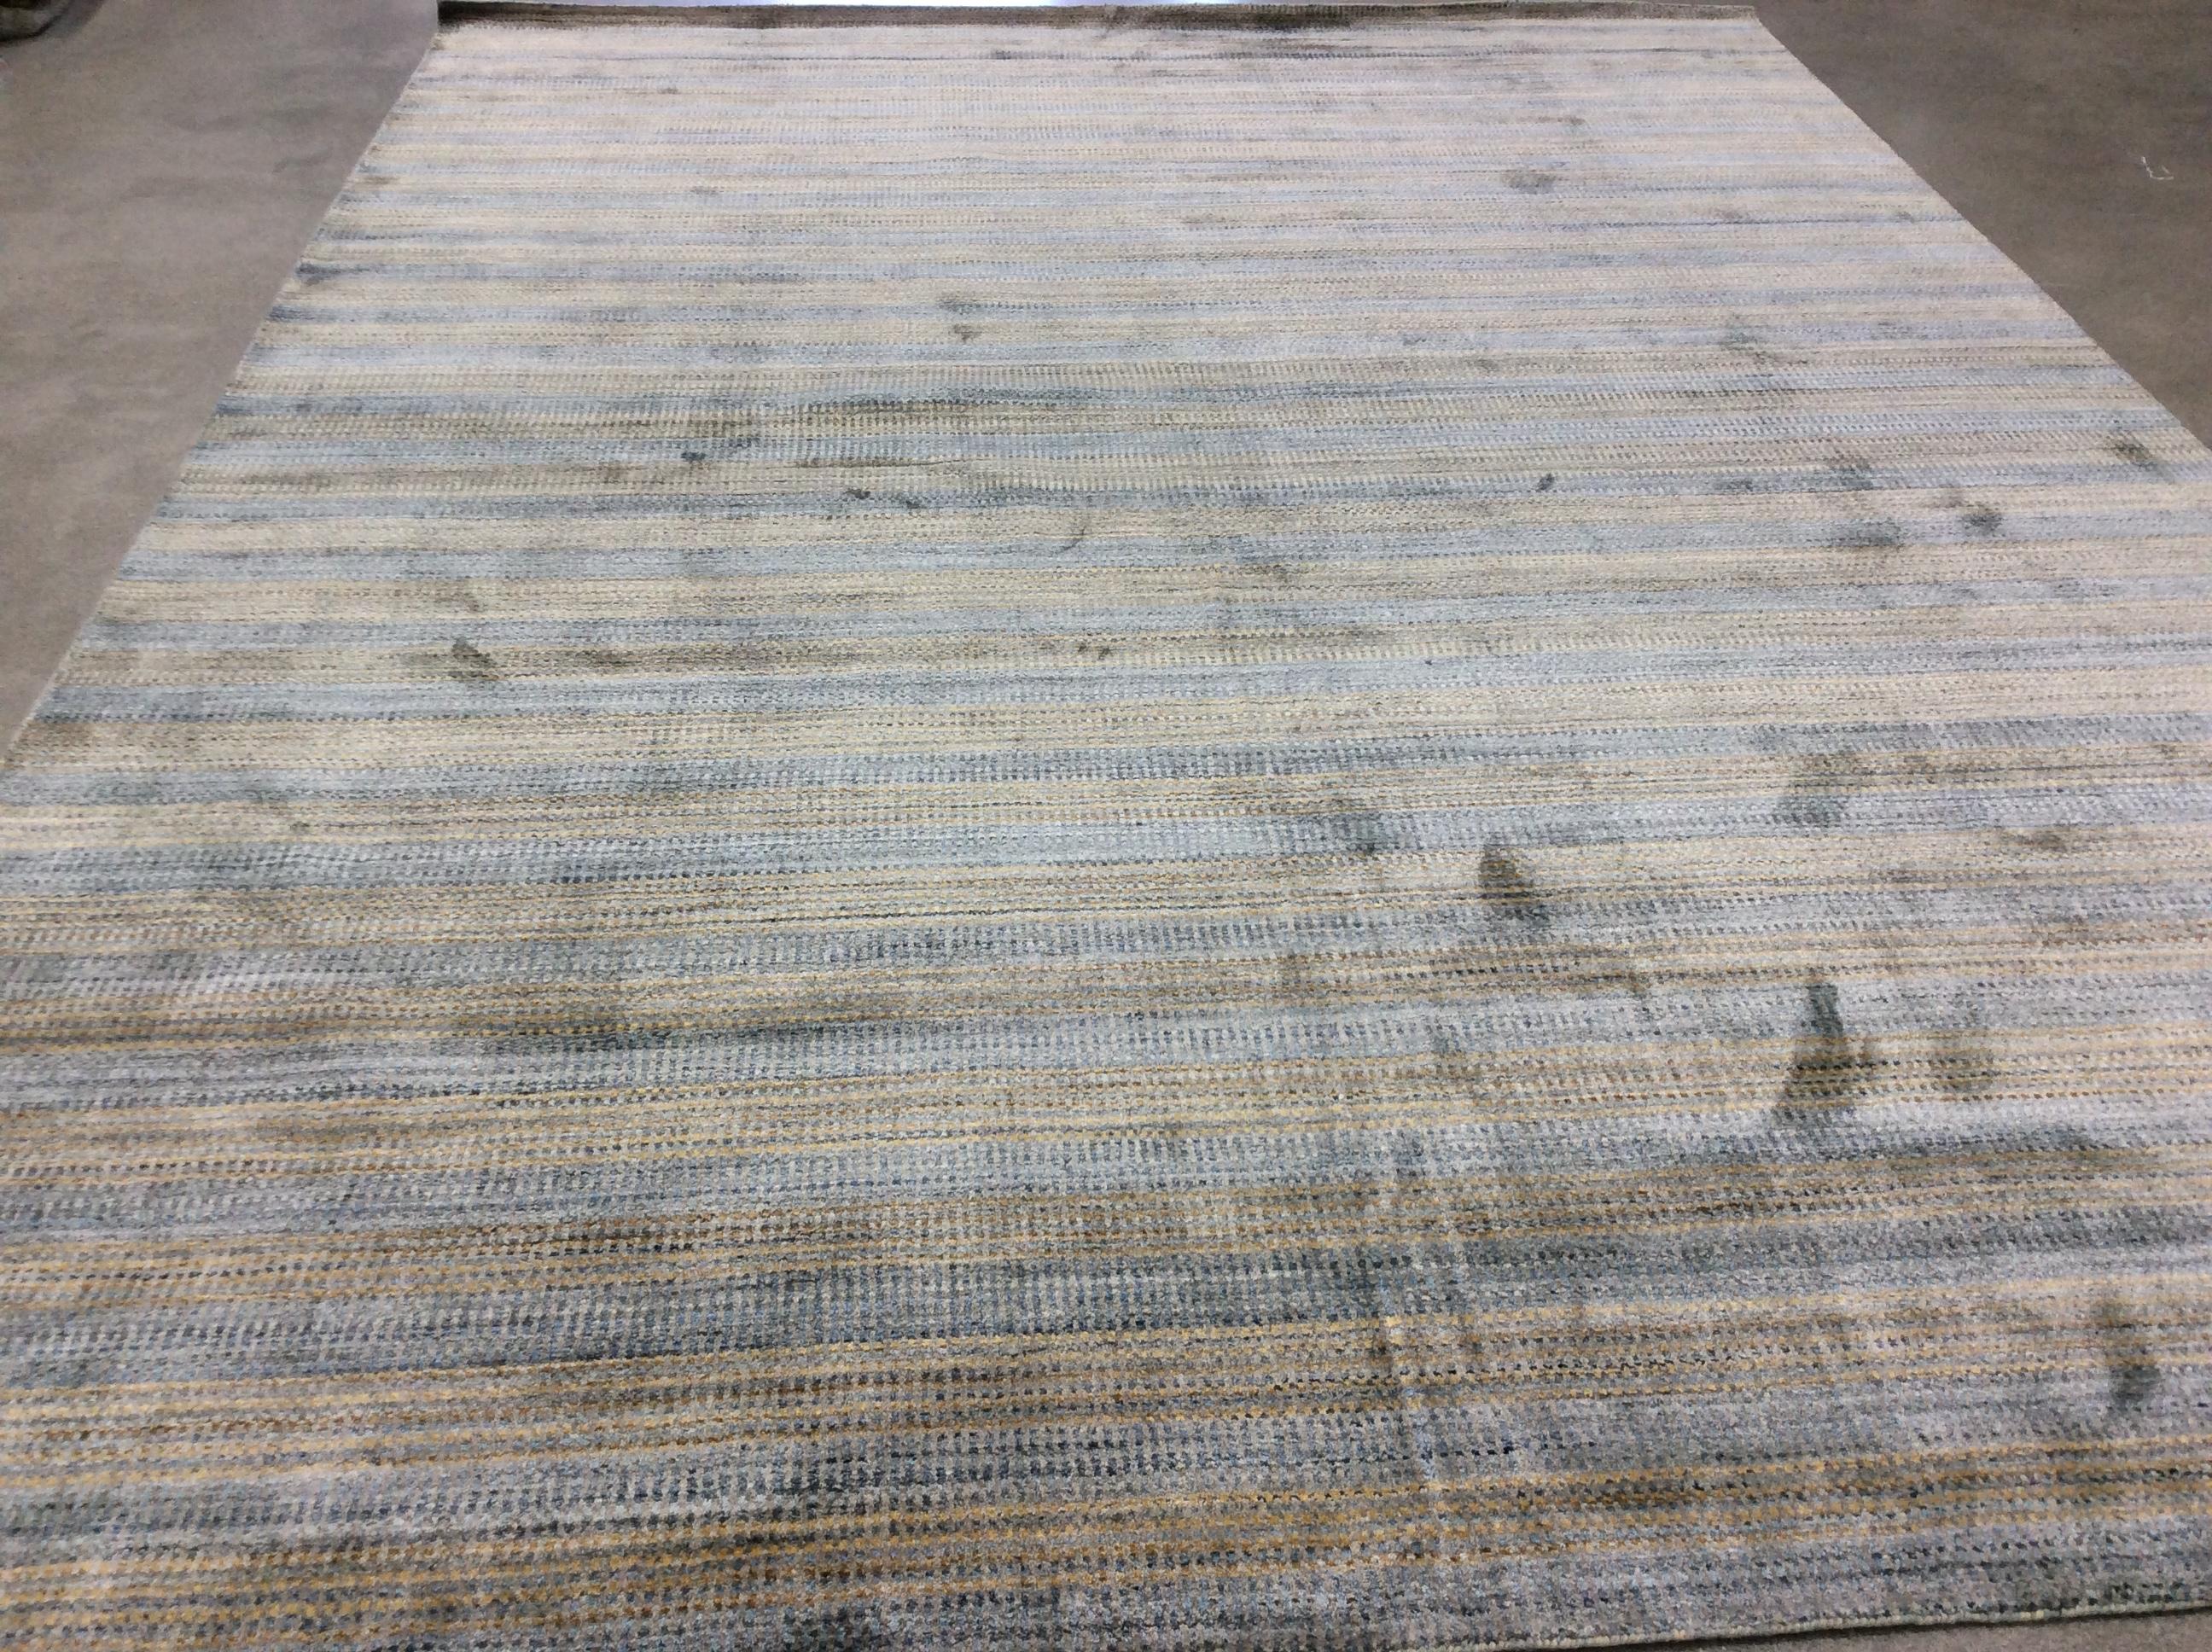 Zen collection rug in striated denim.

Intricate pattern of dots and dash all over this silky feel rug. Neutral color palette with a touch of color, dress it up or down with this subtle rug.  Wool/viscose blend for comfort and durability.  Hand made